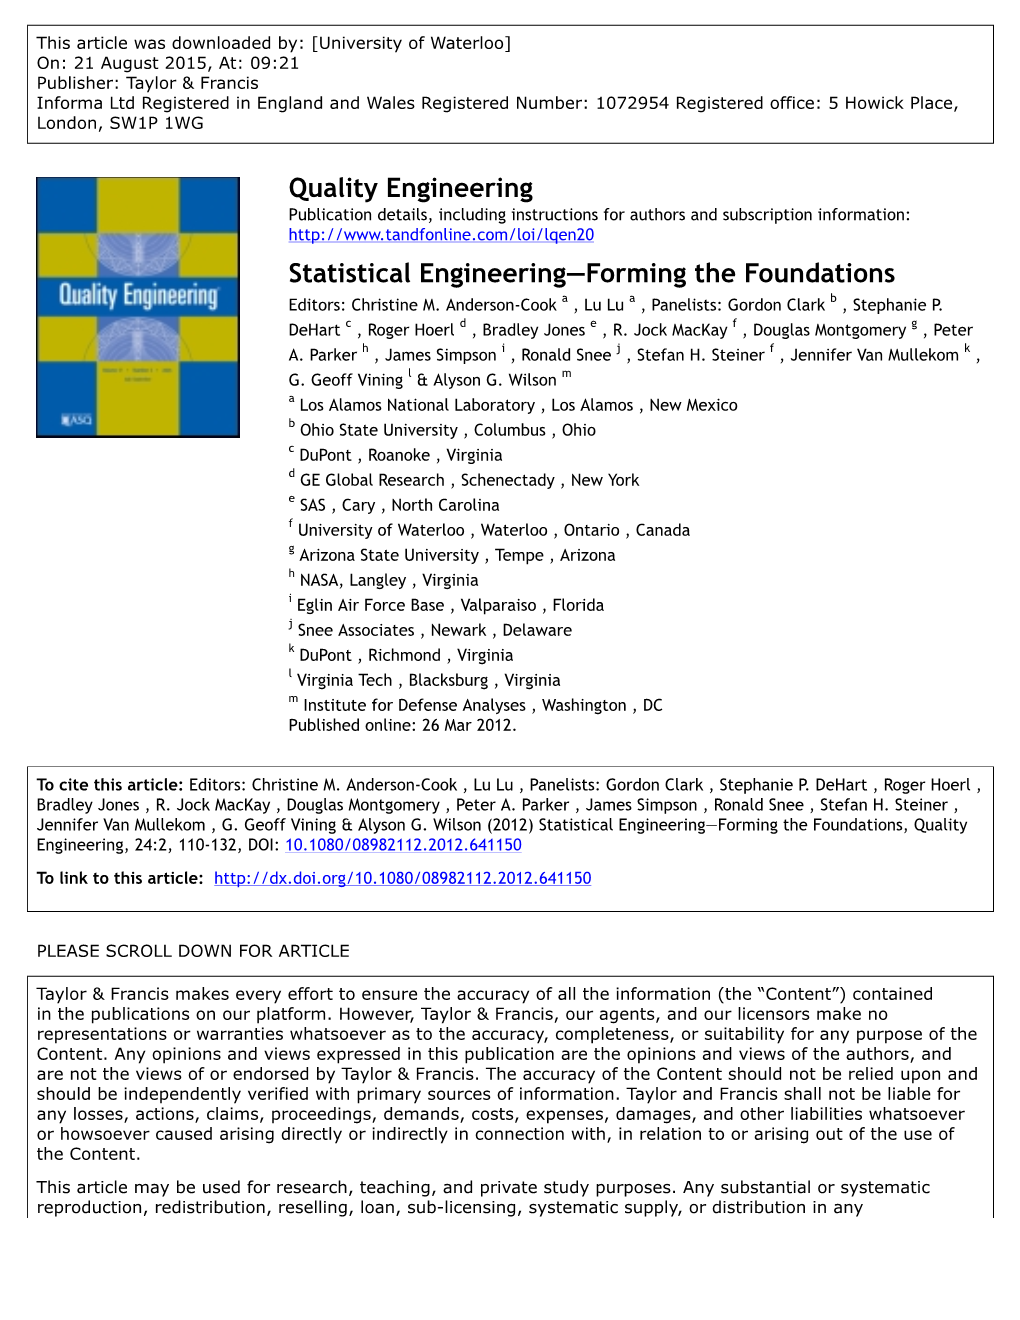 Statistical Engineering—Forming the Foundations Editors: Christine M